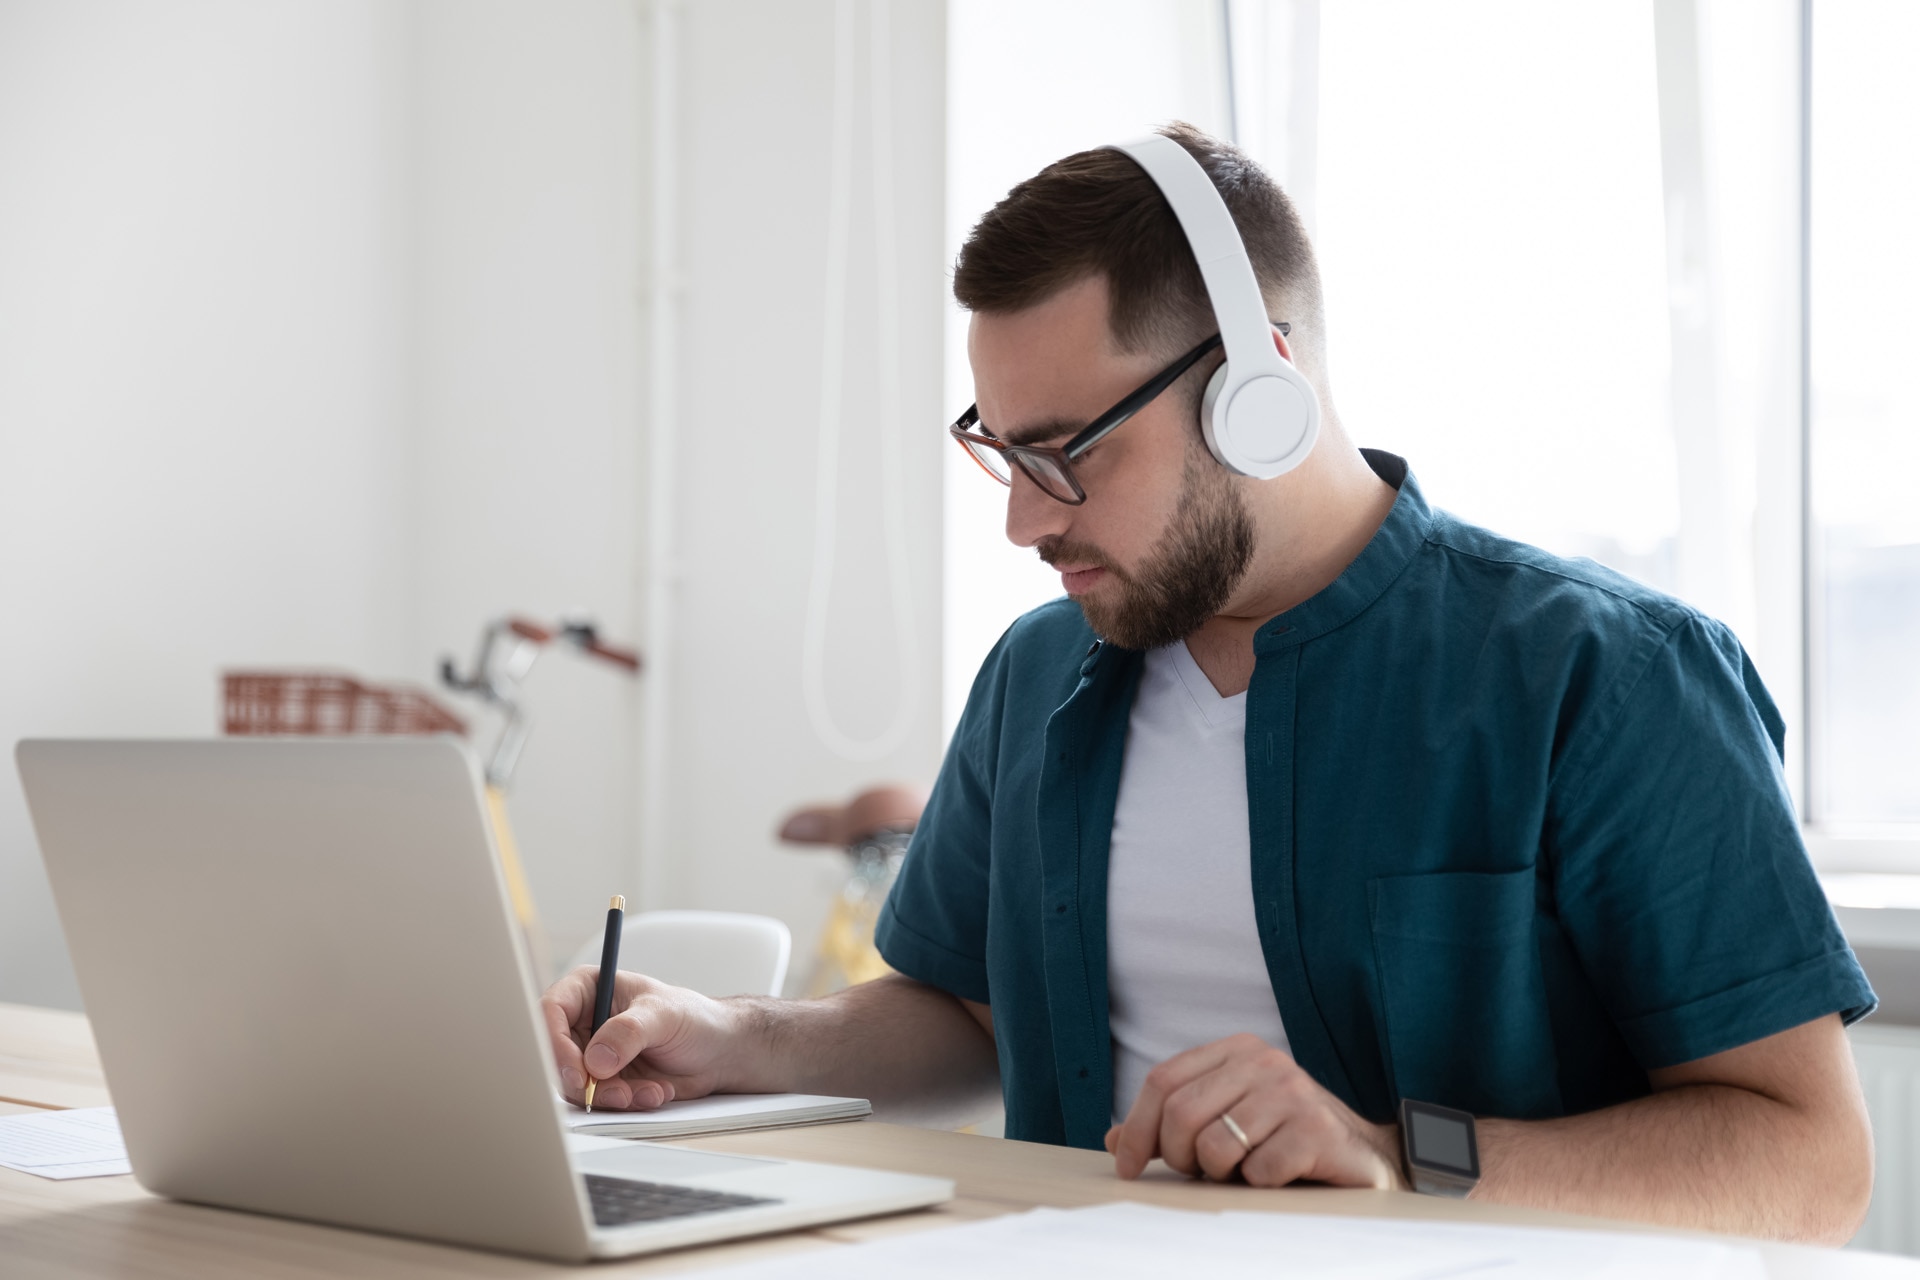 Focused young man businessman company worker employee in glasses wearing wireless headphones, watching educational webinar lecture seminar on laptop online, writing down notes in modern office.; Shutterstock ID 1653287650; purchase_order: -; job: -; client: -; other: -